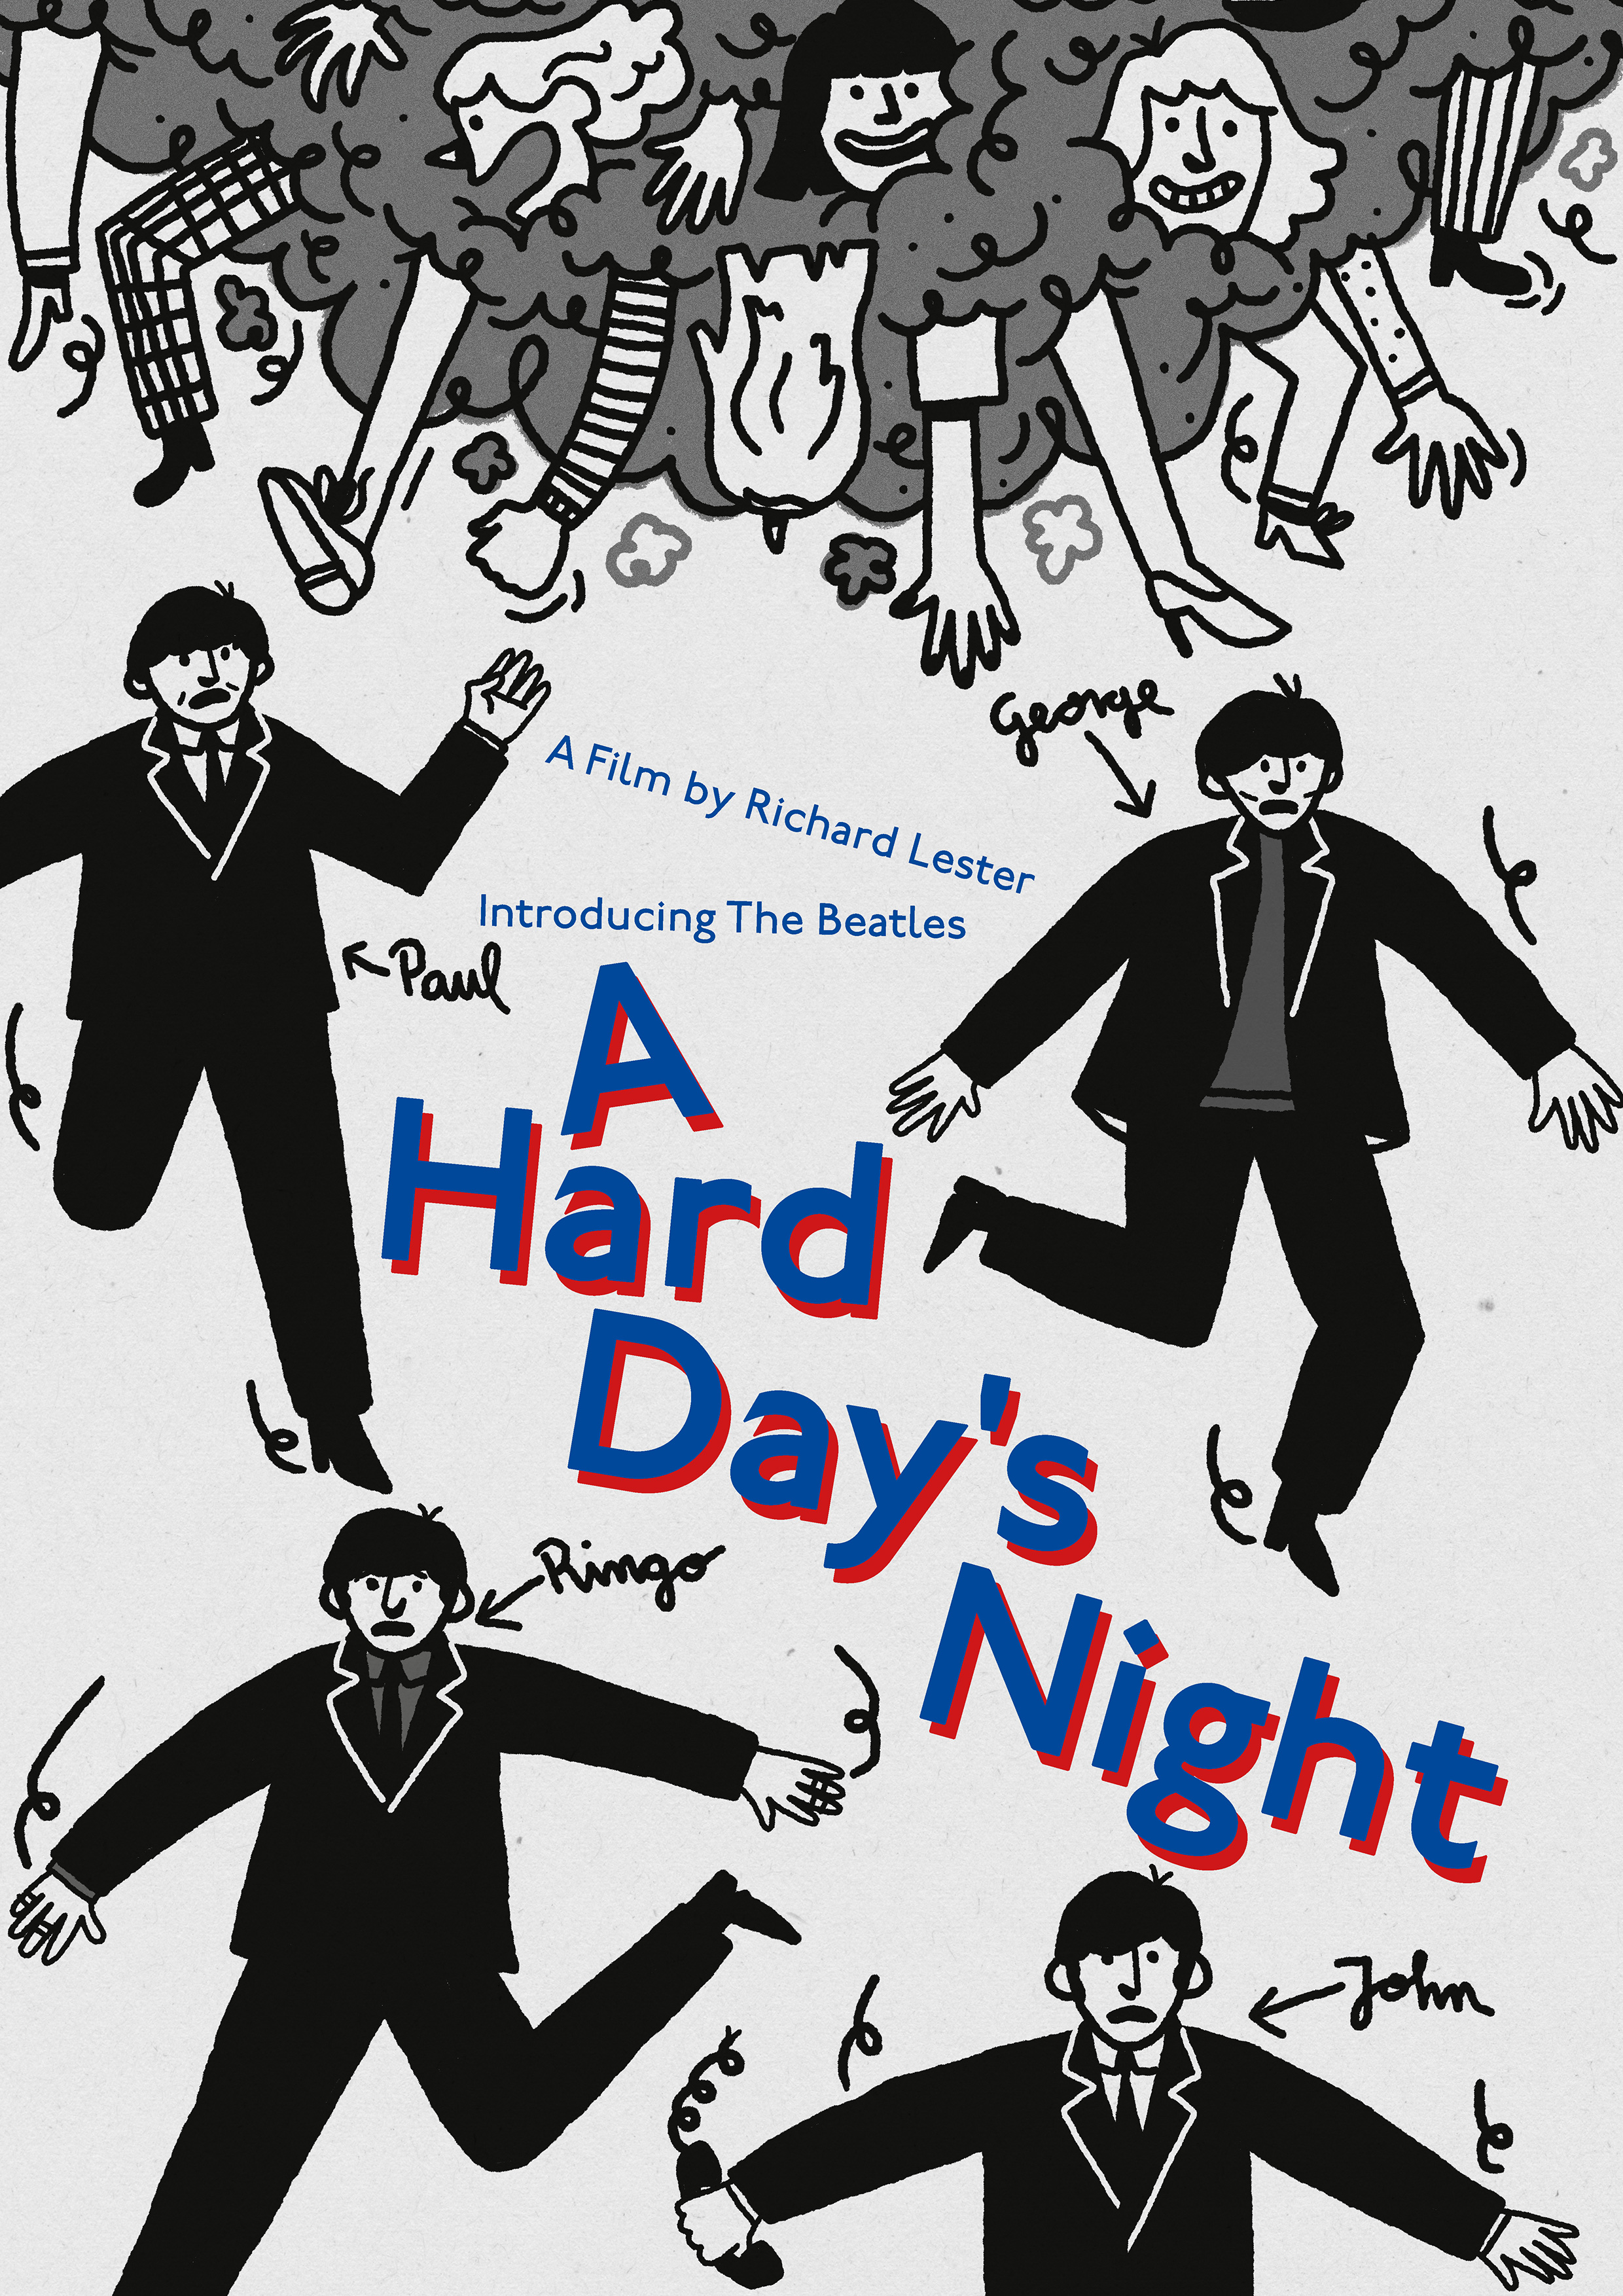 Marvin Traber A Hard Day’s Night